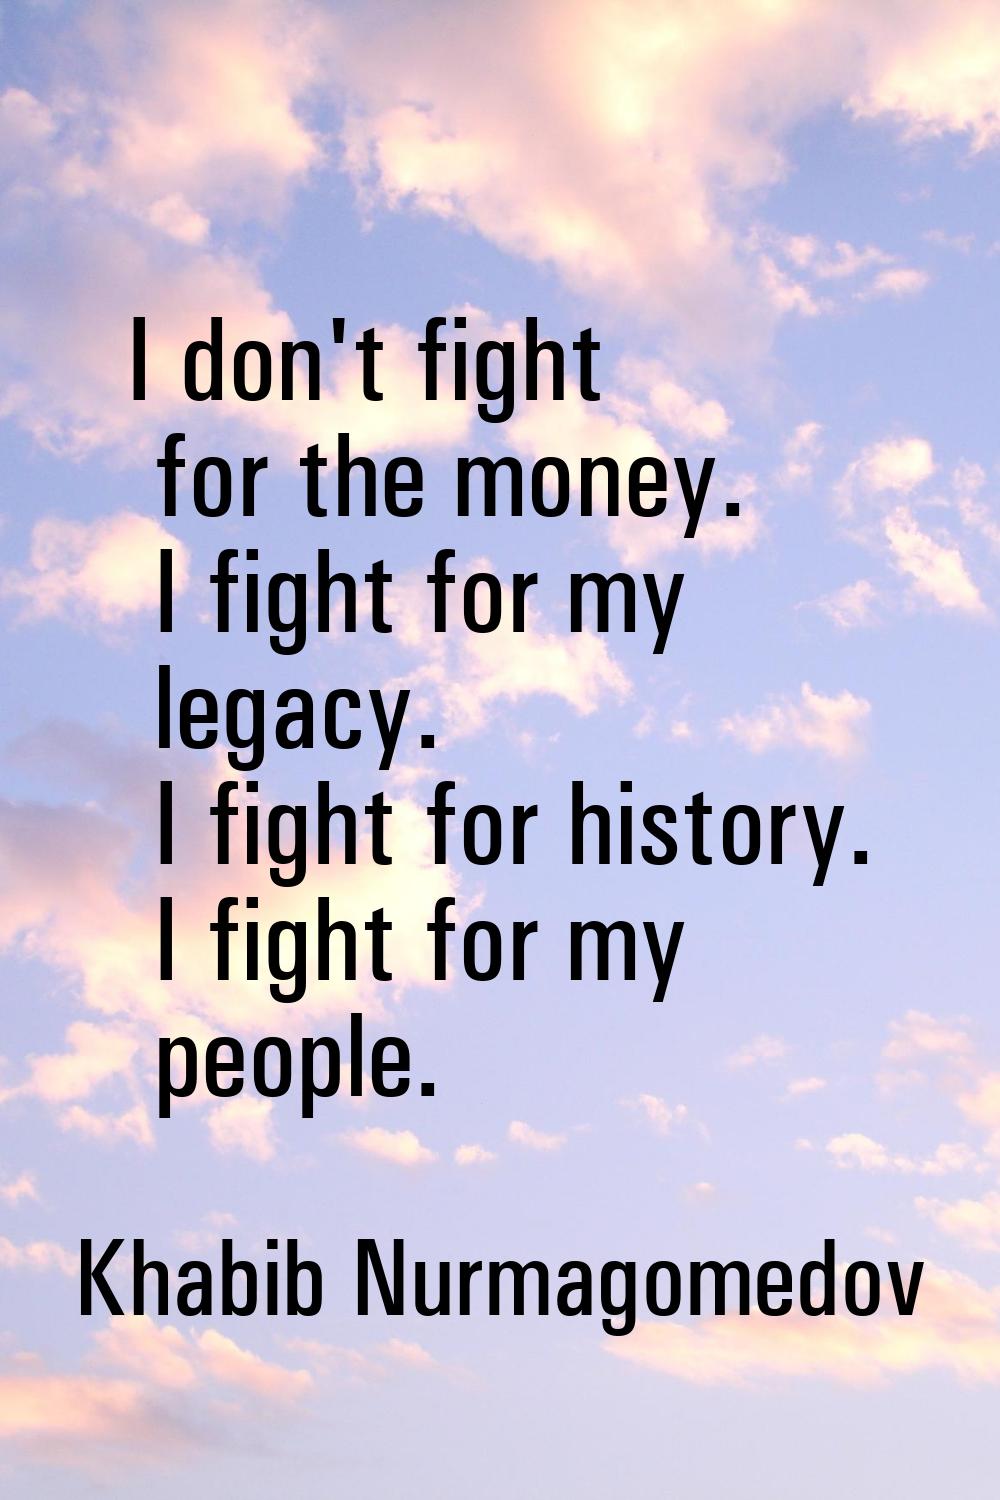 I don't fight for the money. I fight for my legacy. I fight for history. I fight for my people.